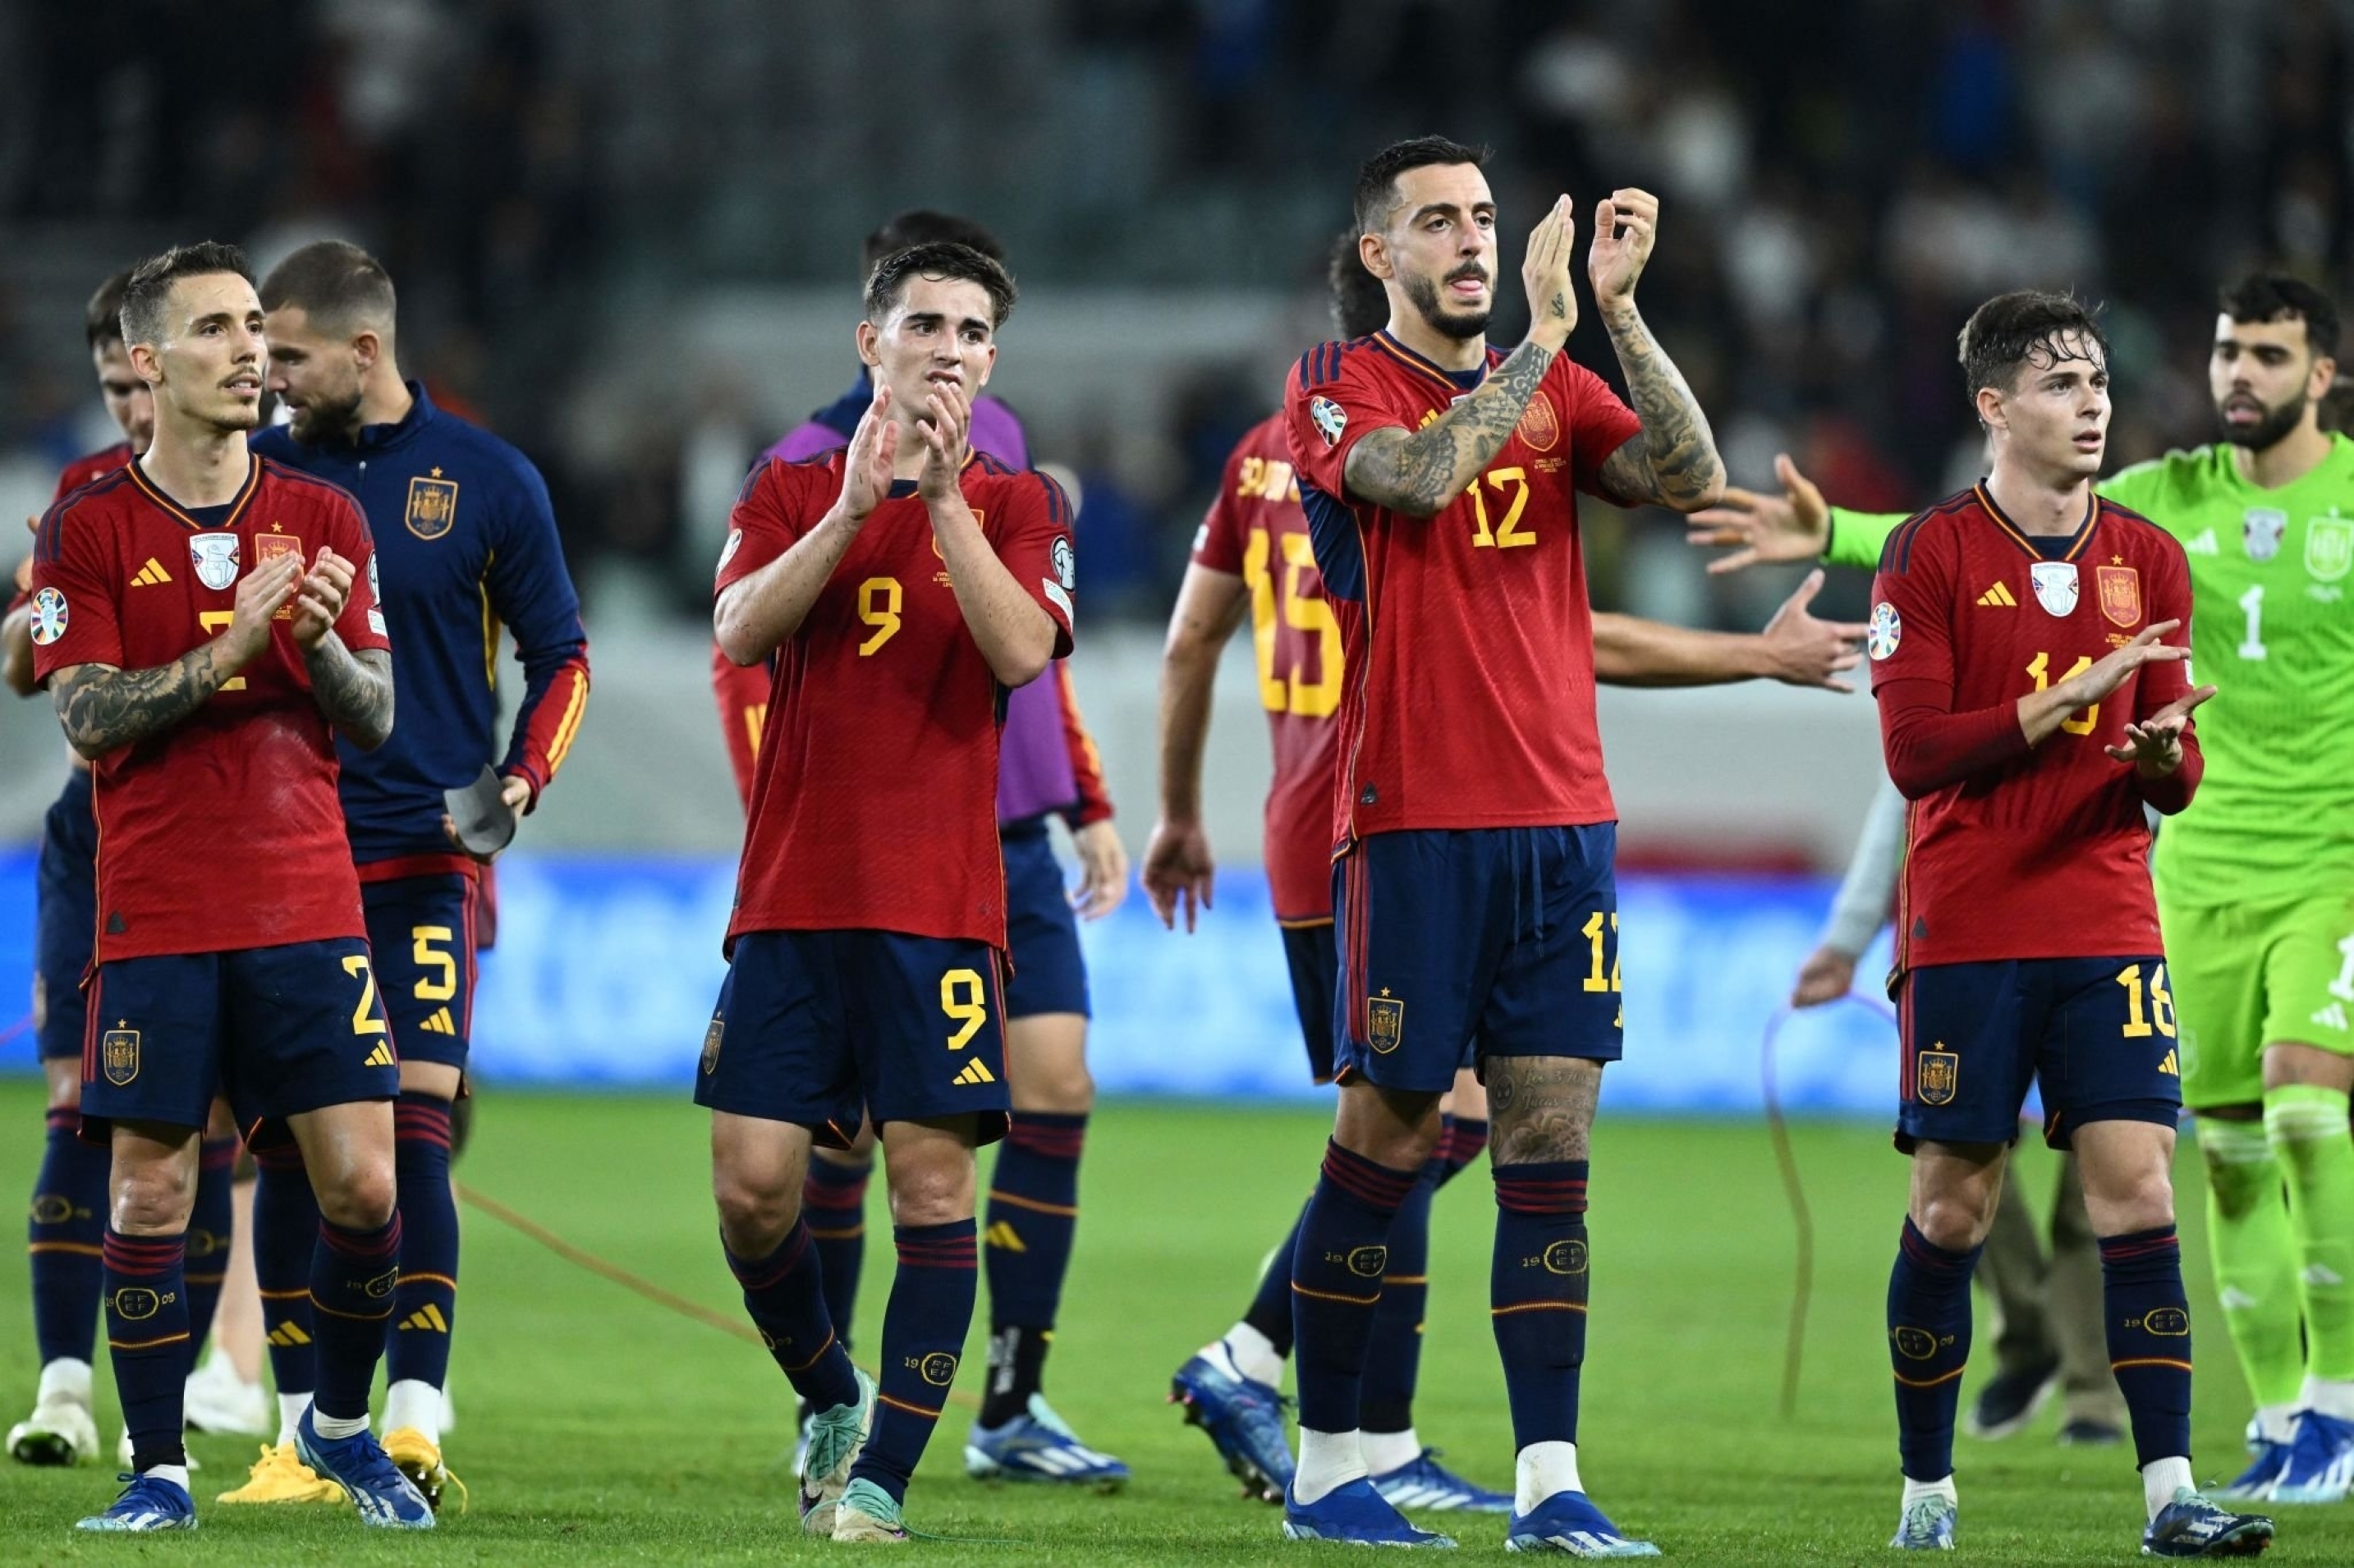 Spain vs Georgia - ESP vs GEO - La Roja are determined to end Euro Qualifiers campaign at the top of the Group A table with a comfortable win